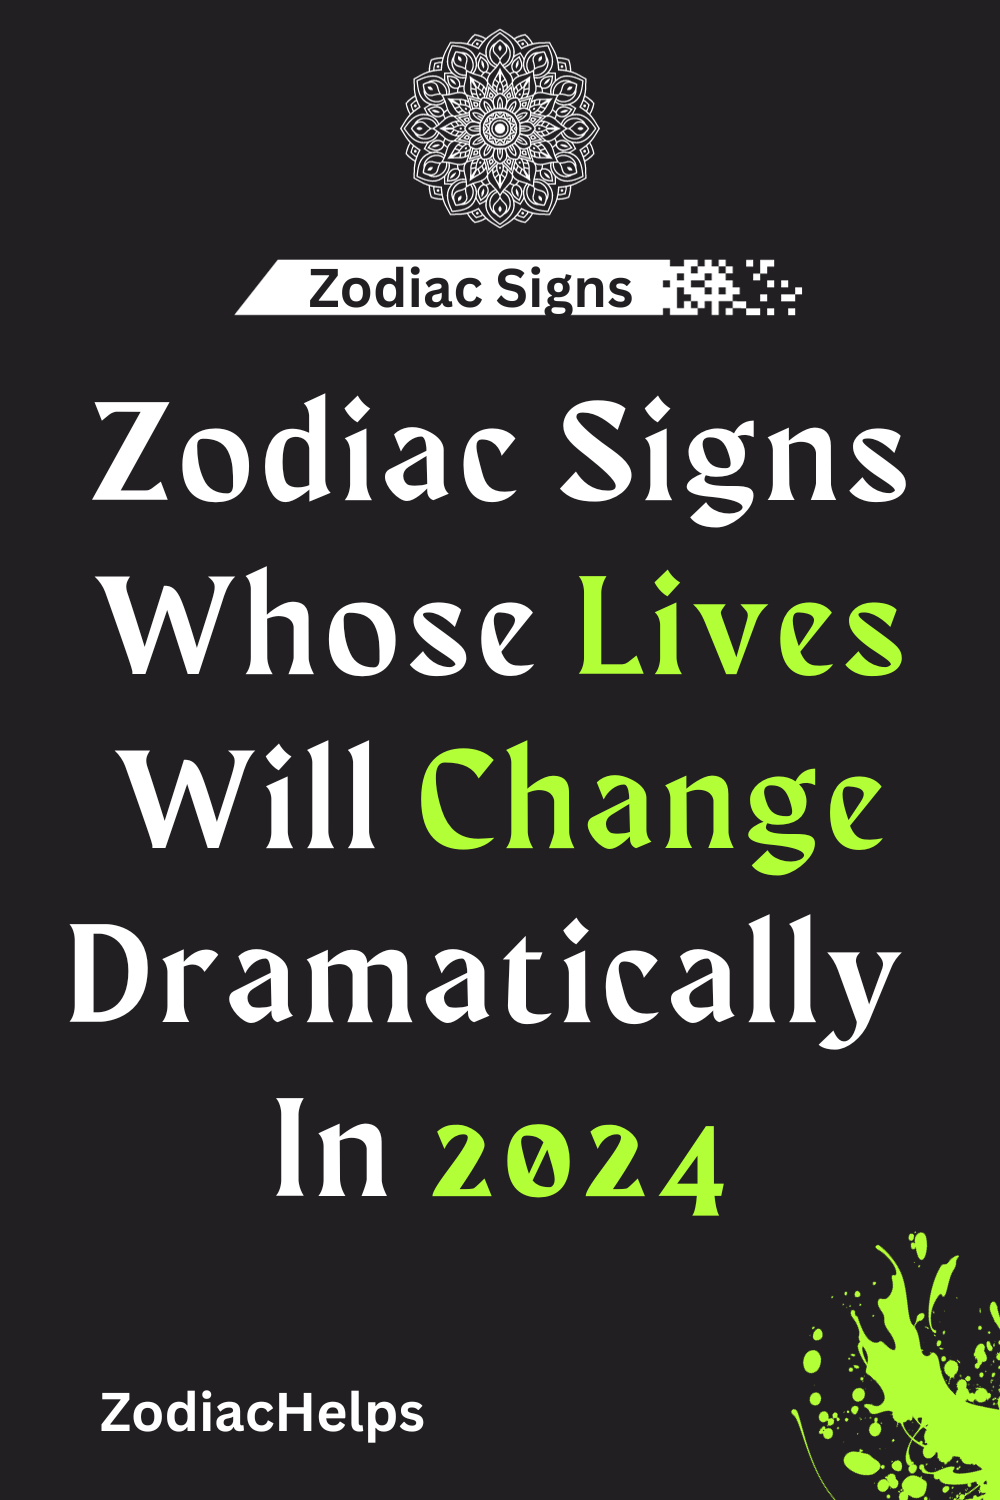 Zodiac Signs Whose Lives Will Change Dramatically In 2024